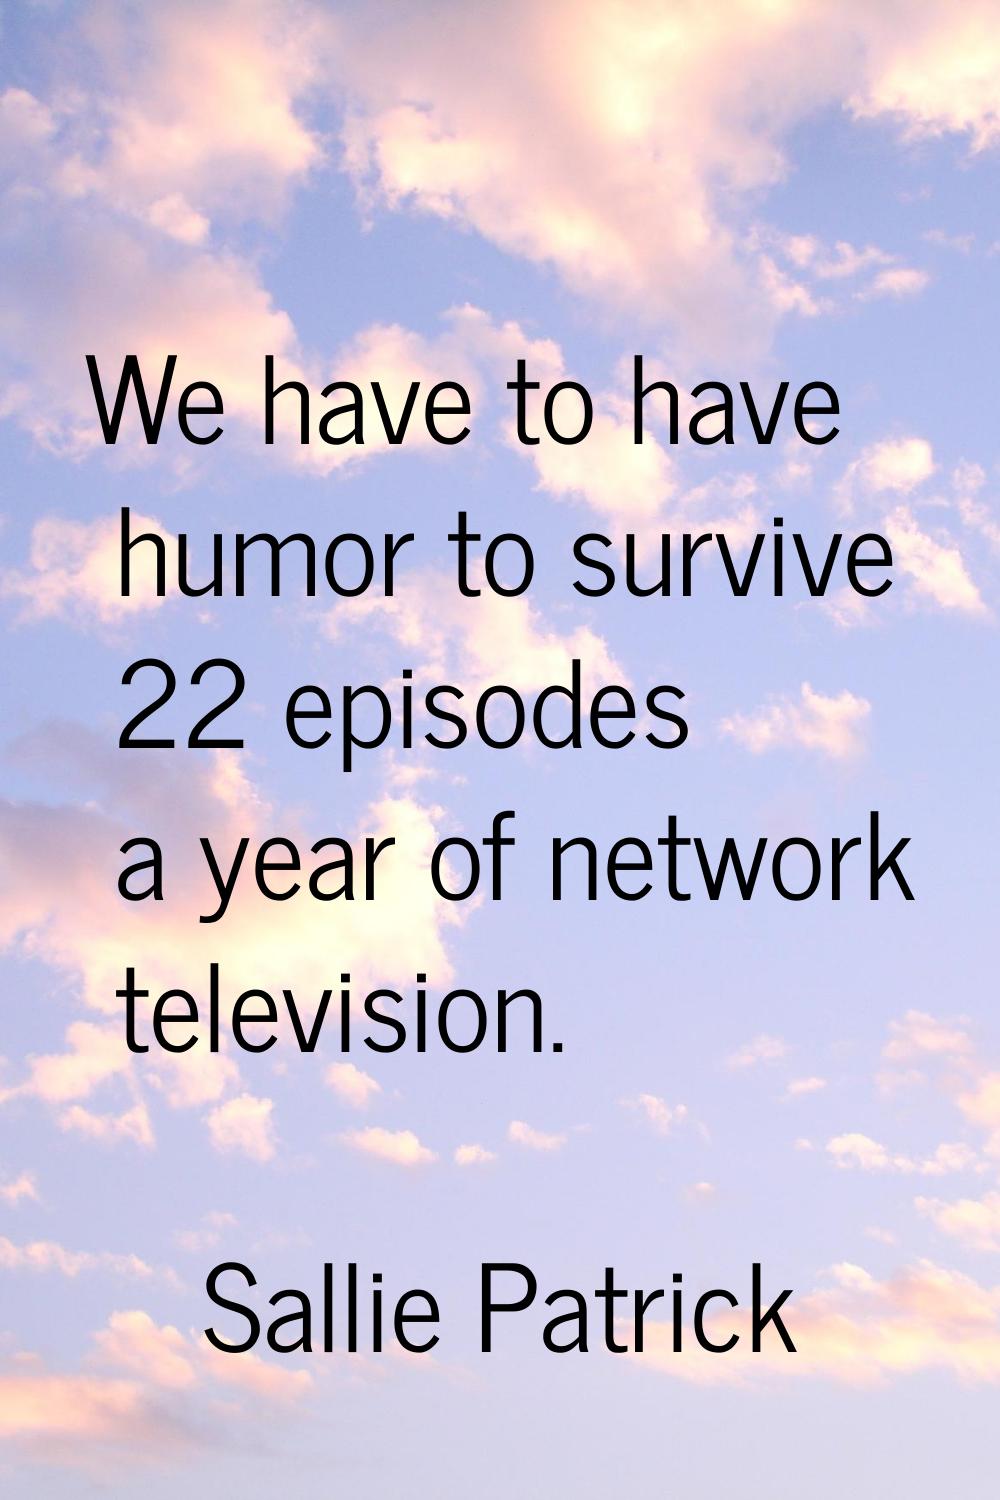 We have to have humor to survive 22 episodes a year of network television.